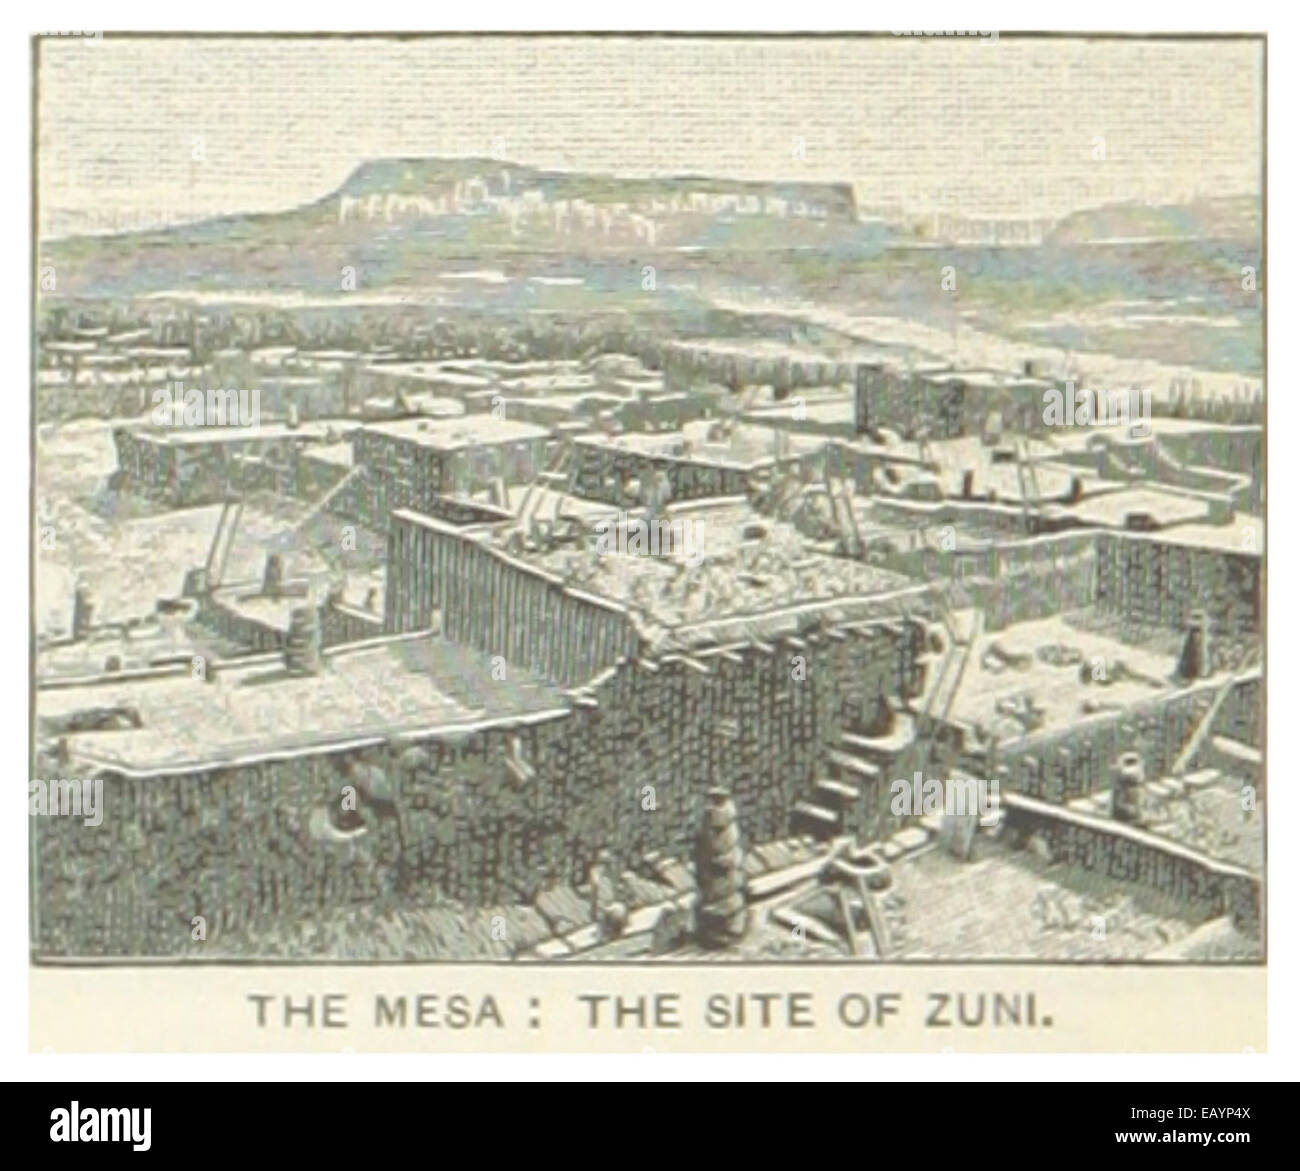 US-NM(1891) p572 THE MESA - THE SITE OF ZUNI Stock Photo